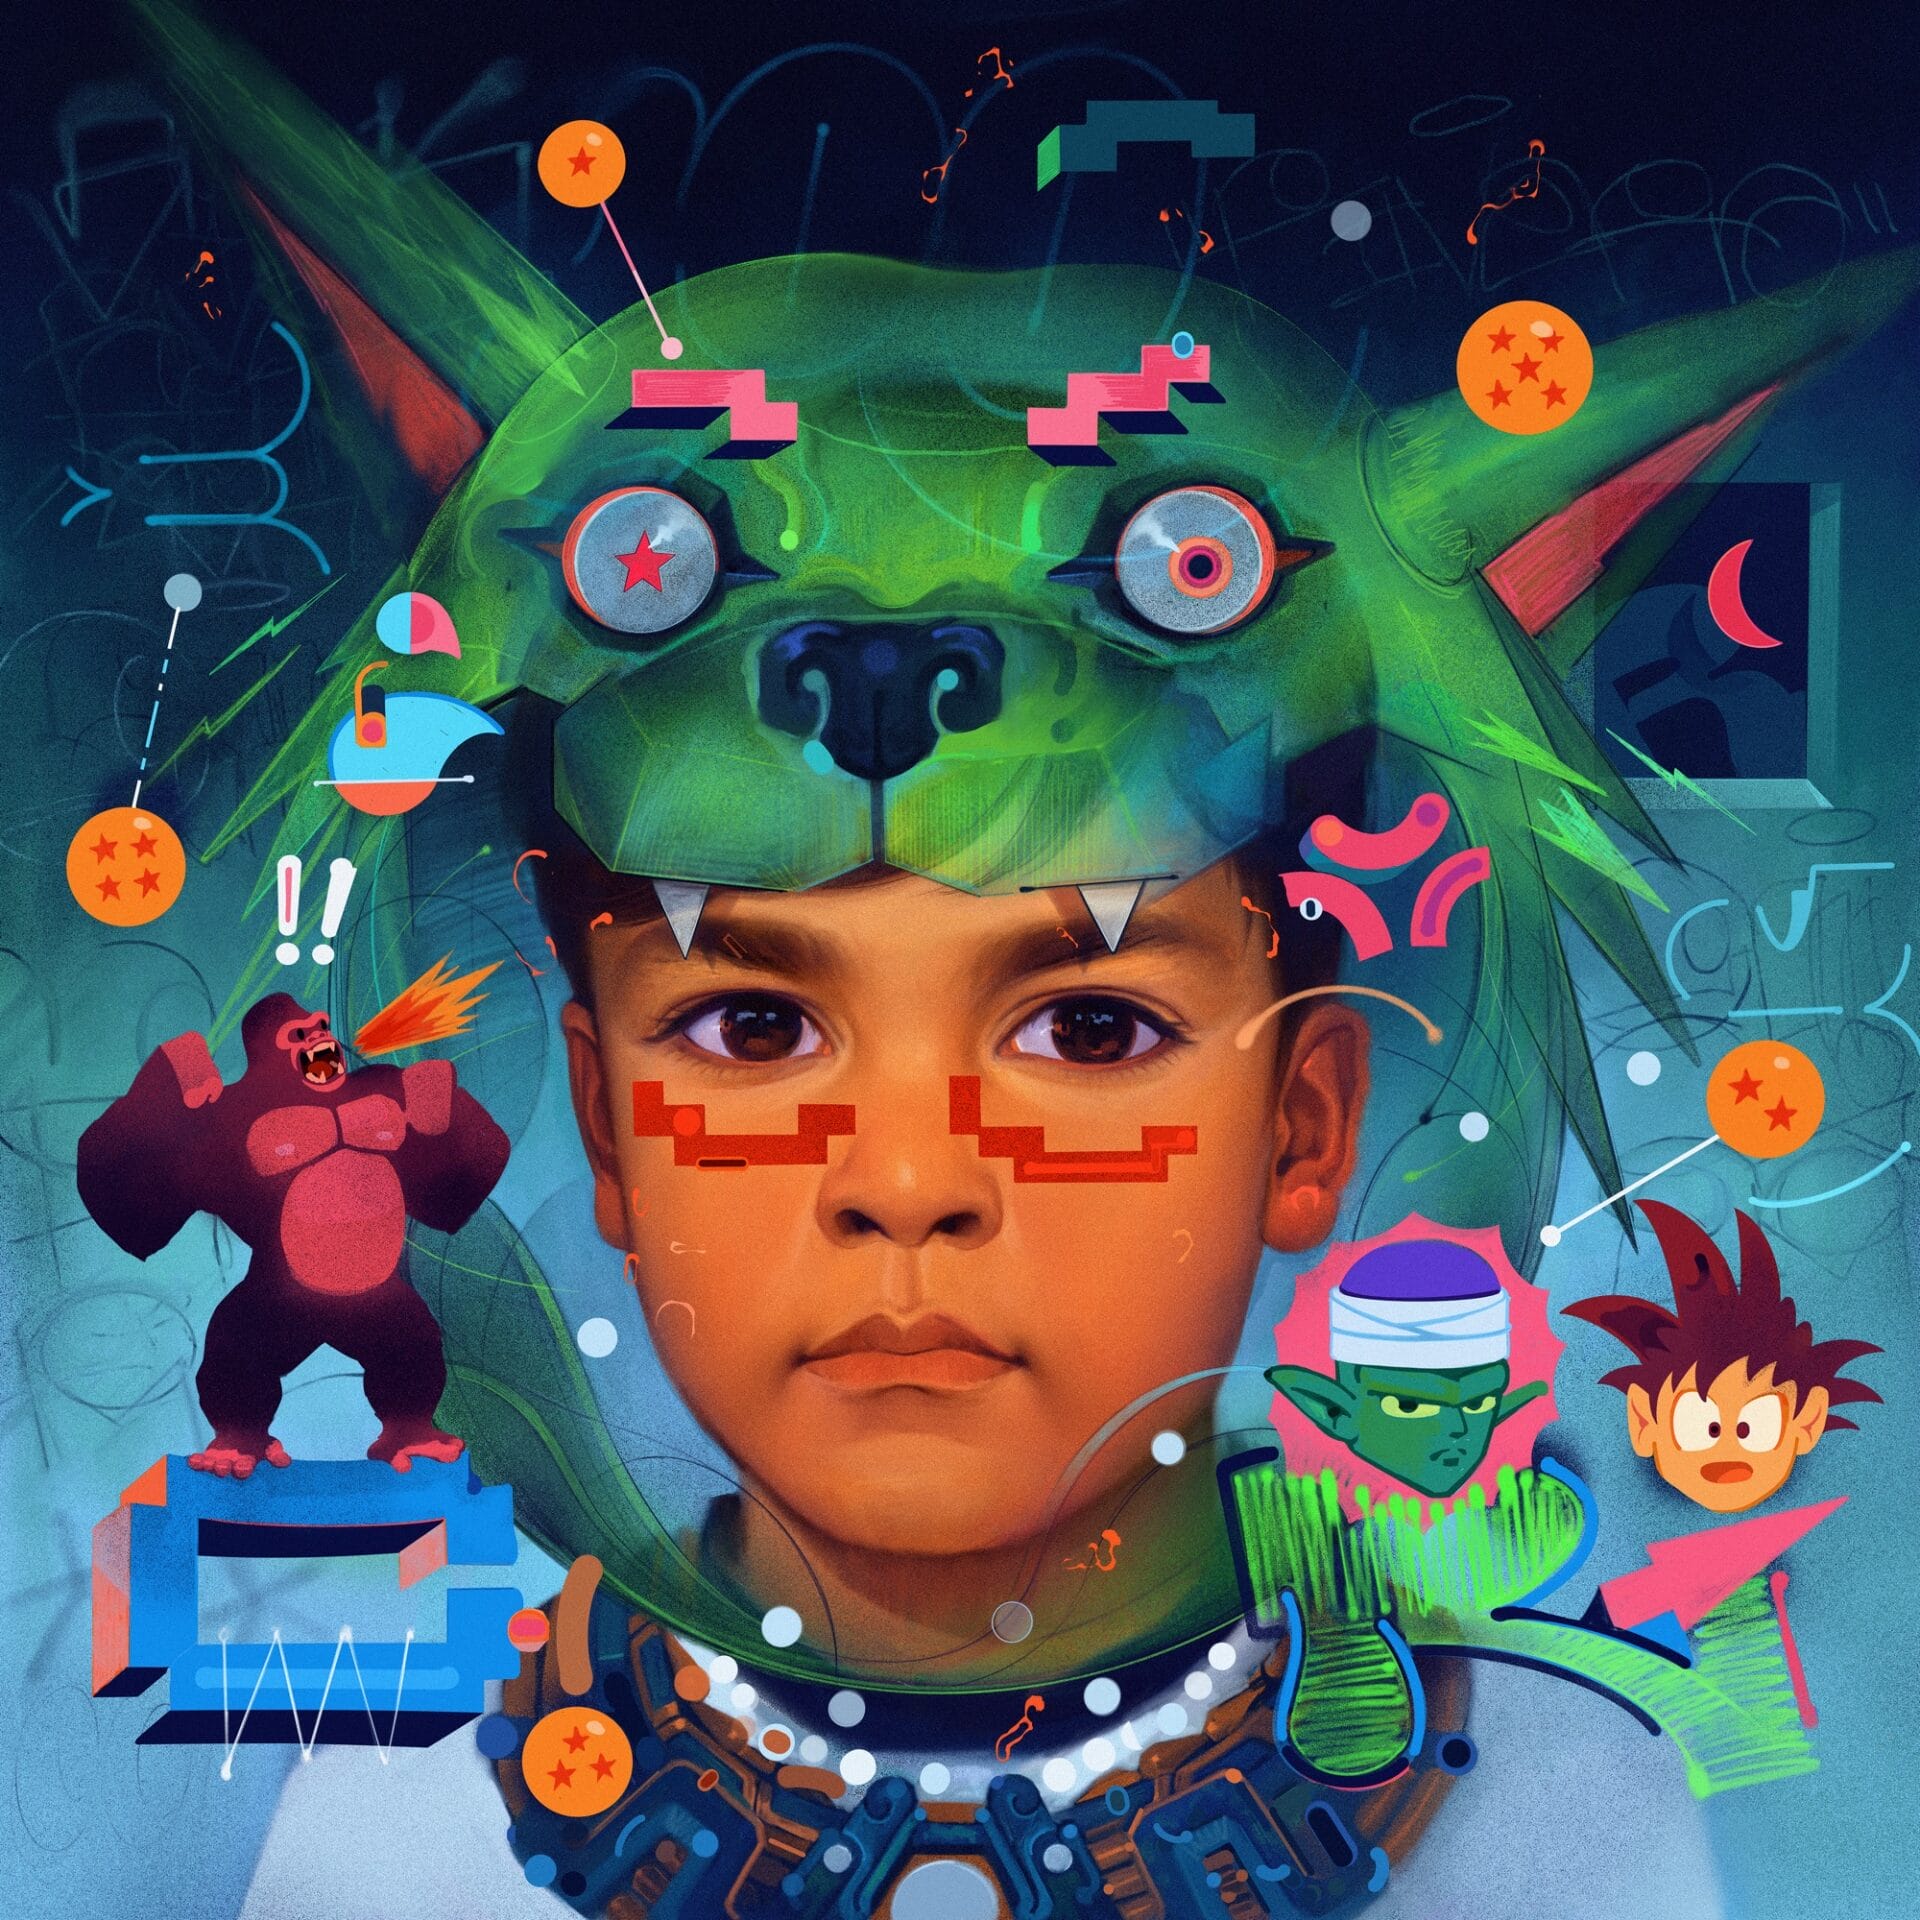 a young child wears a green wolf-like headdress and cartoon characters surrounding them